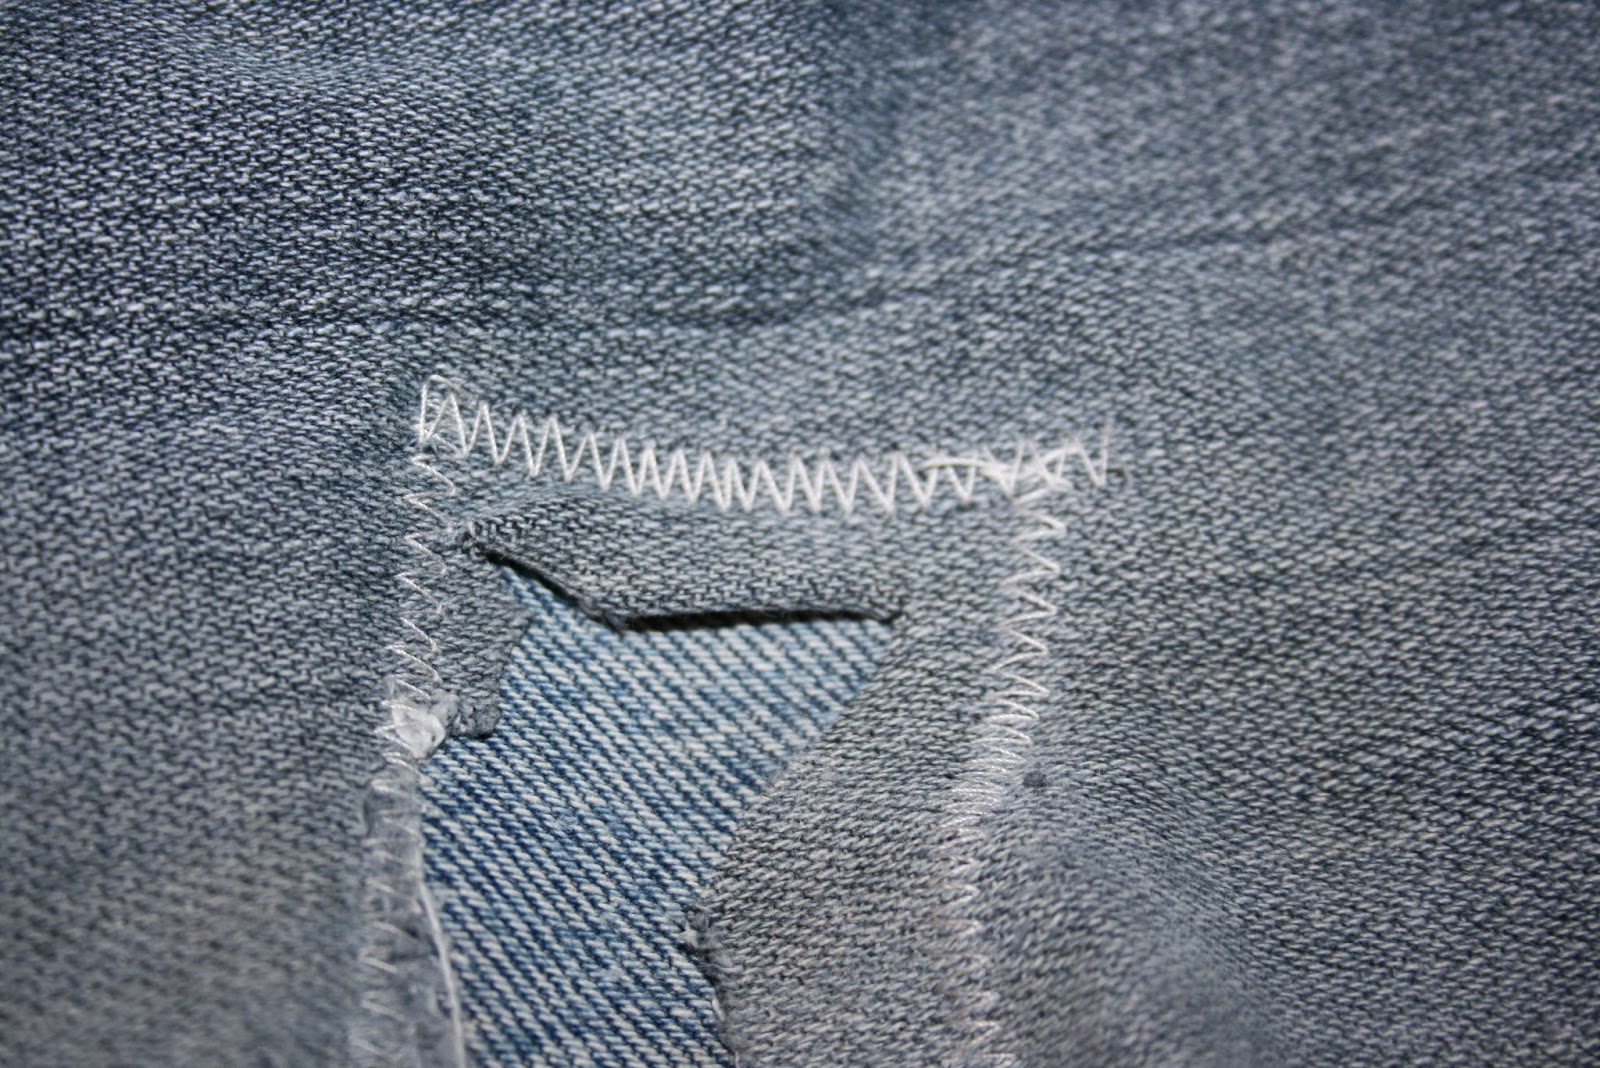 Mountain Stitches: Patching Jeans